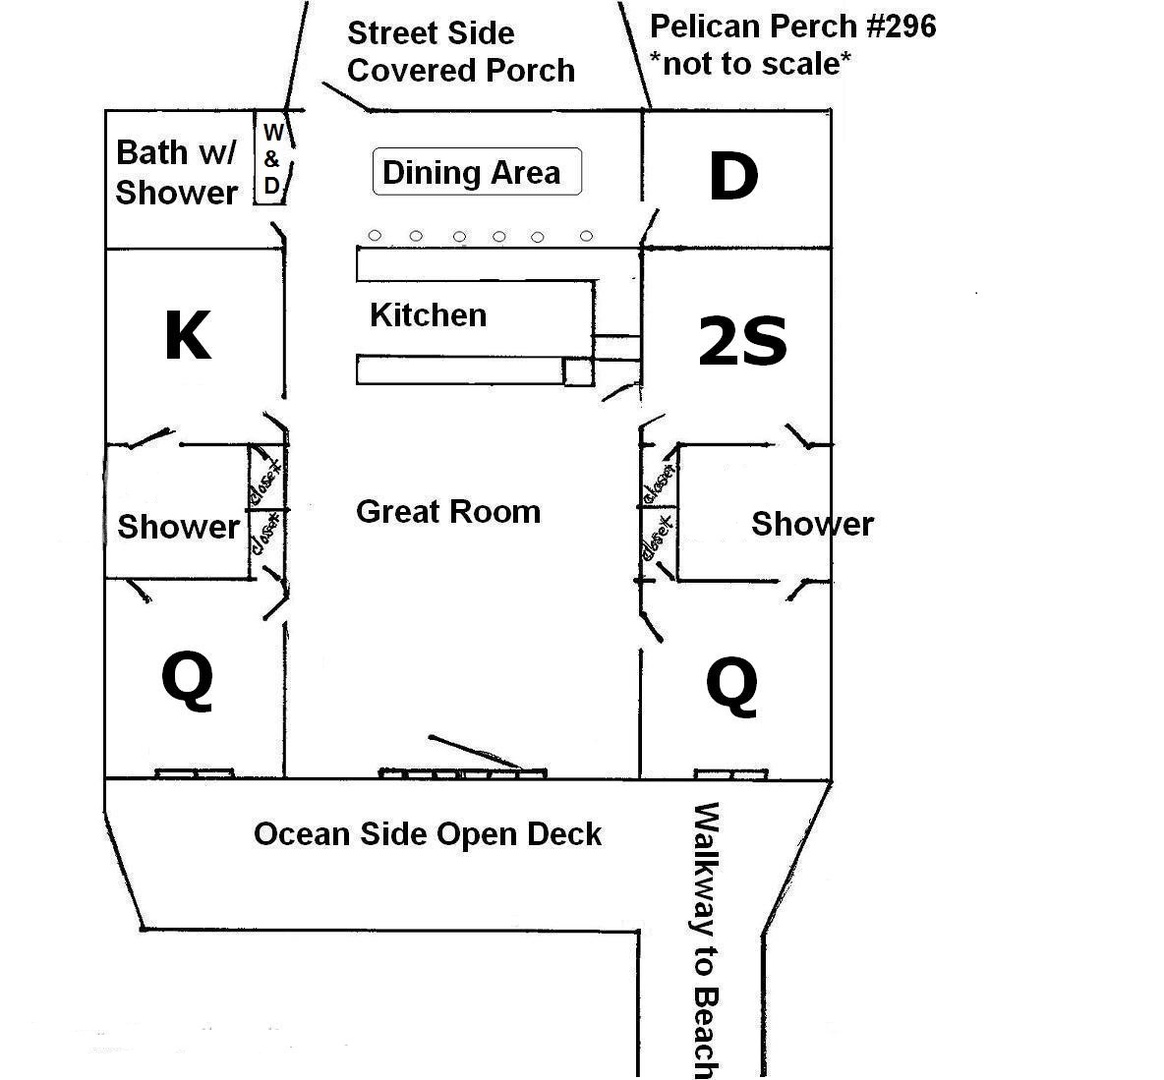 InkedPelican Perch Layout